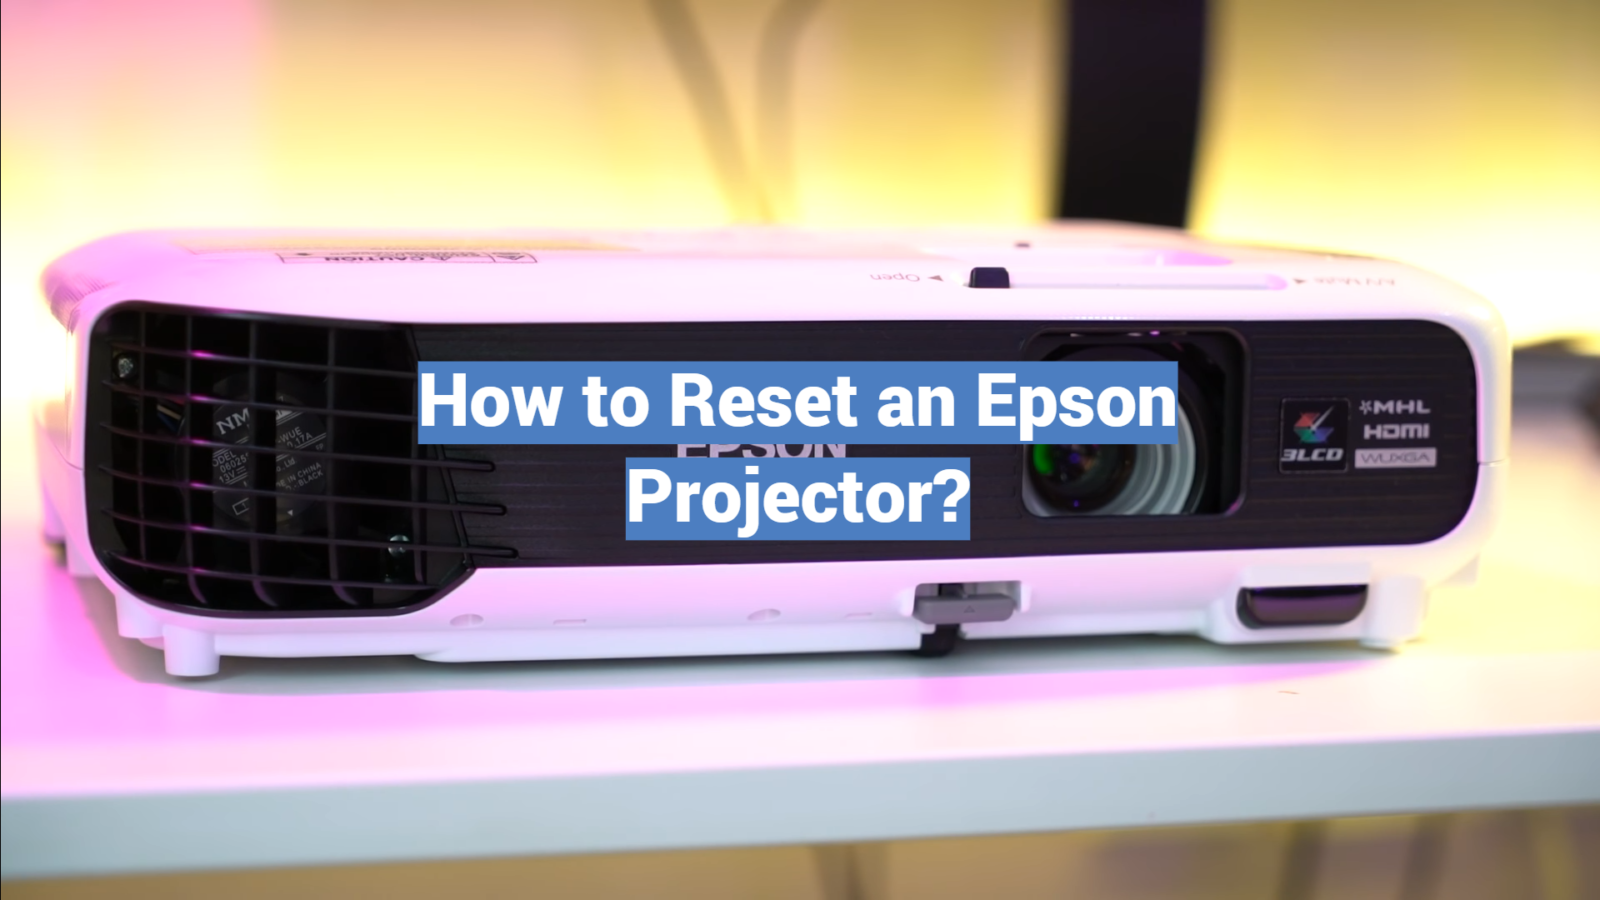 How to Reset an Epson Projector?